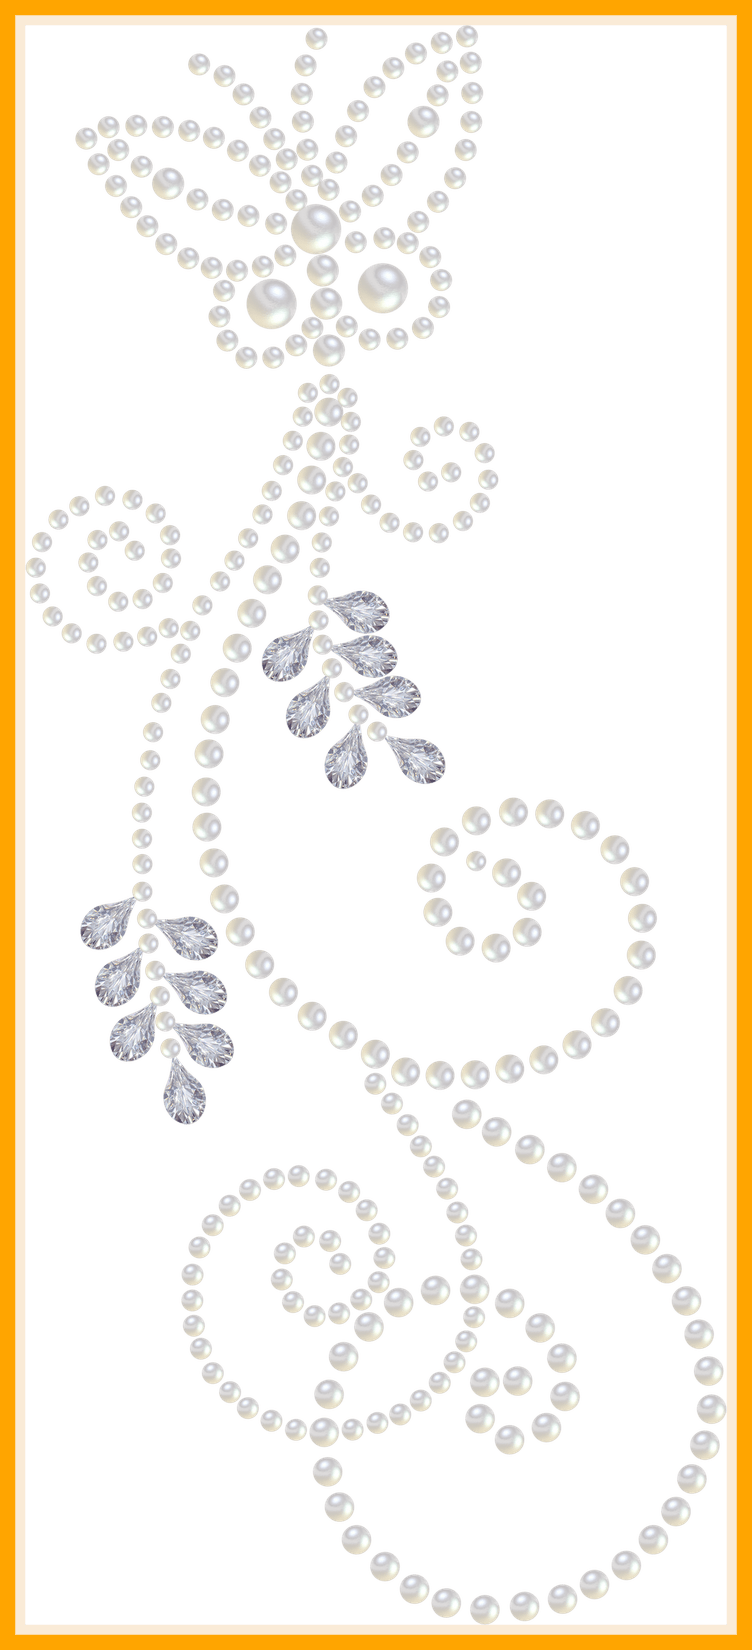 Diamond clipart swirl. Marvelous another pearl and